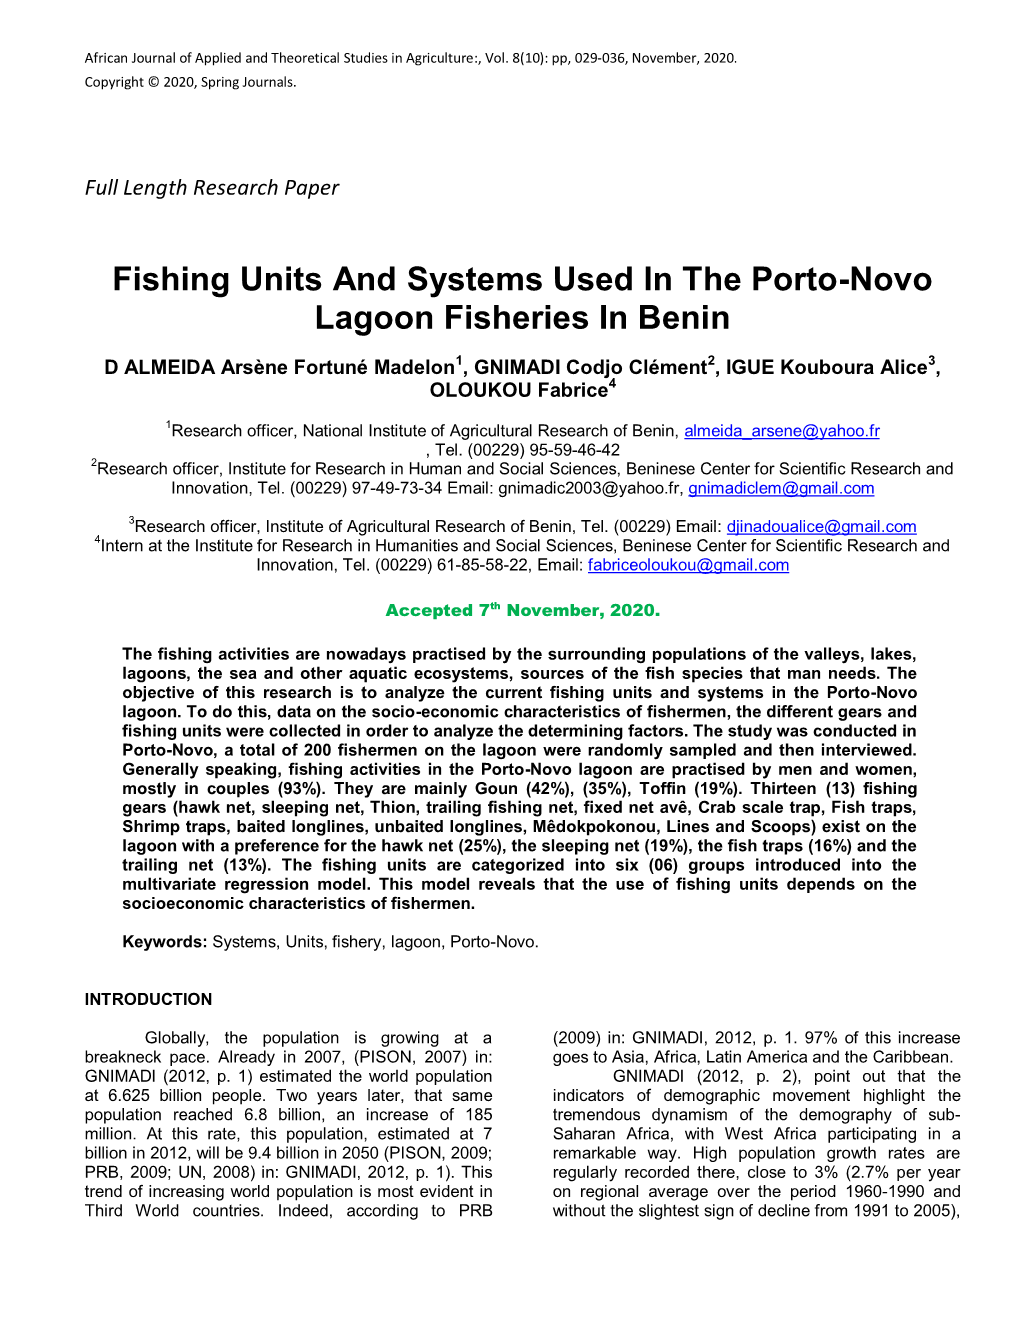 Fishing Units and Systems Used in the Porto-Novo Lagoon Fisheries in Benin